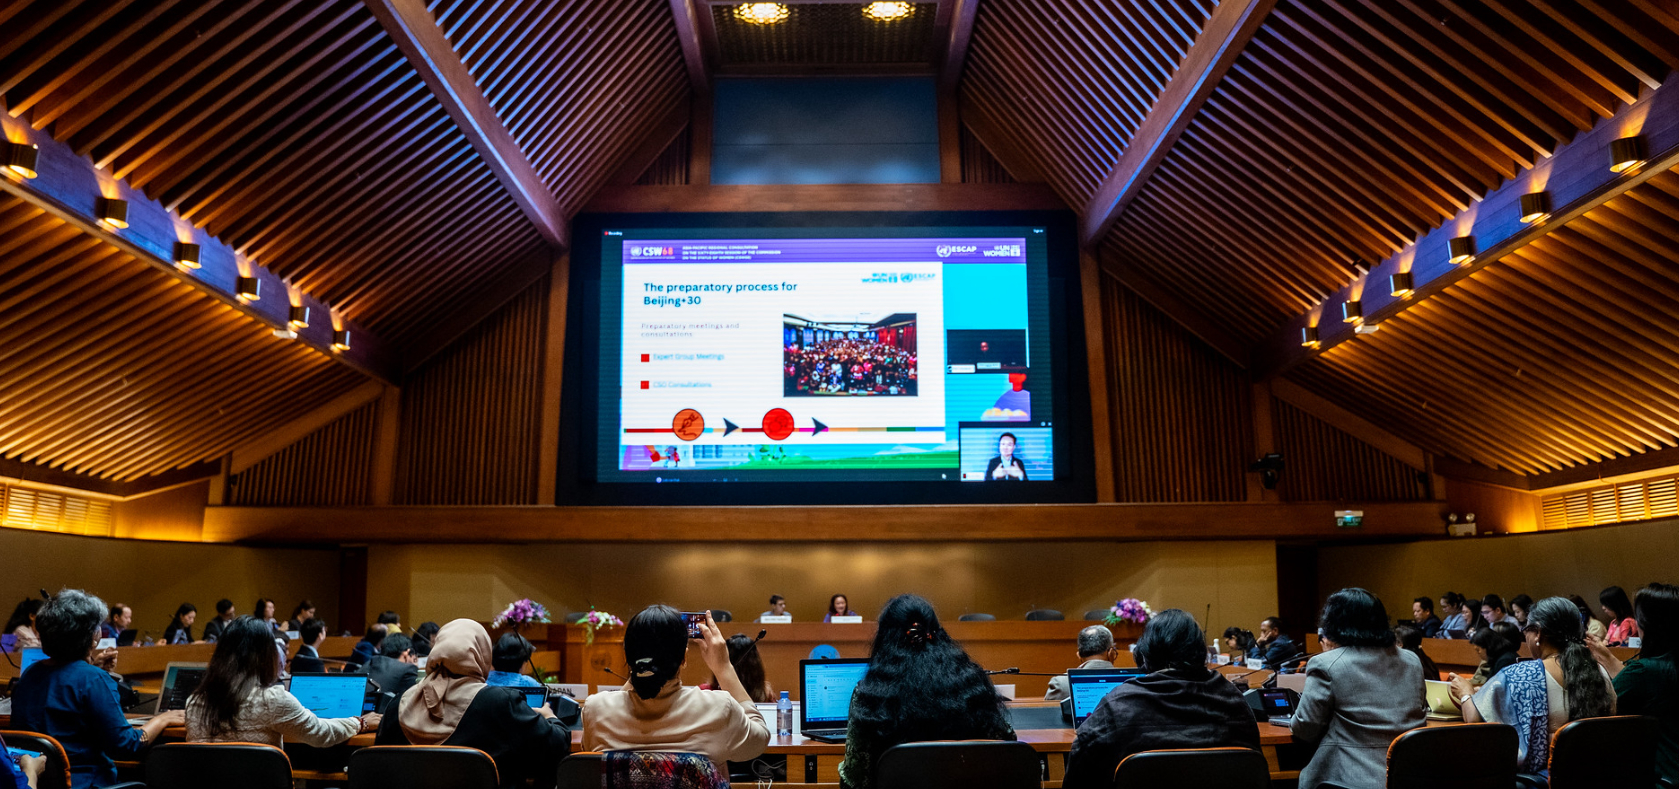 Member states and civil society organizations from across Asia and the Pacific at the Beijing+30 review informative session held during a regional CSW68 consultation in Bangkok, Thailand.